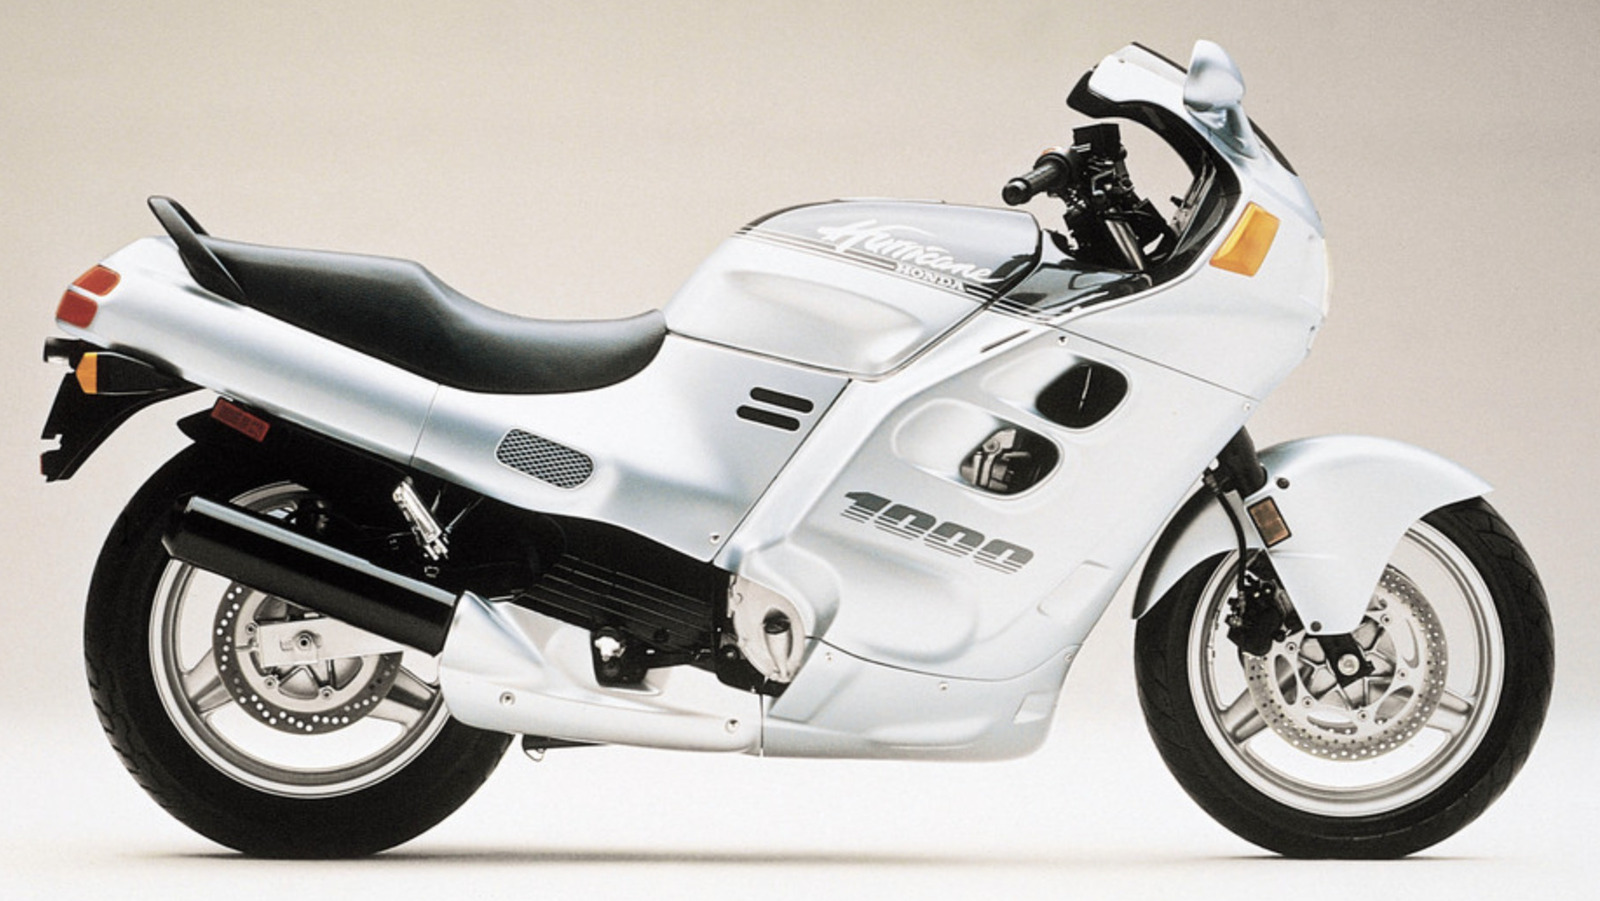 What Made The Honda CBR1000F 'Hurricane' Motorcycle So Special